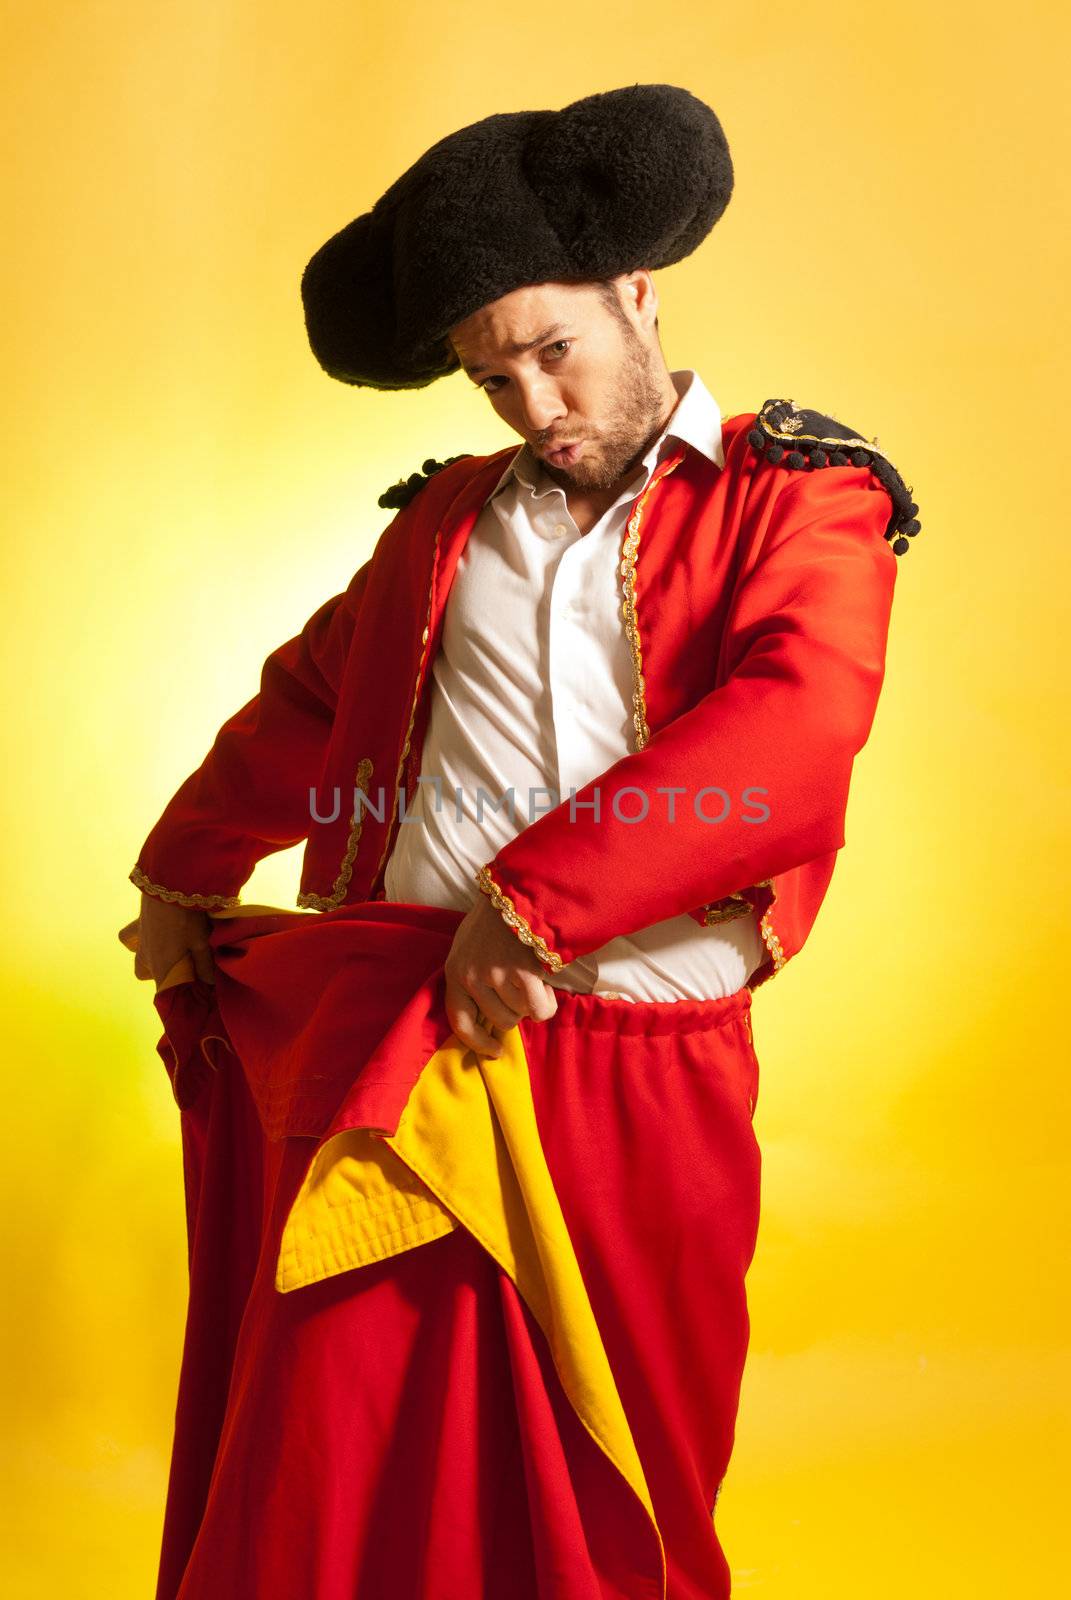 Bullfighter courage red yellow humor spanish colors  by dgmata